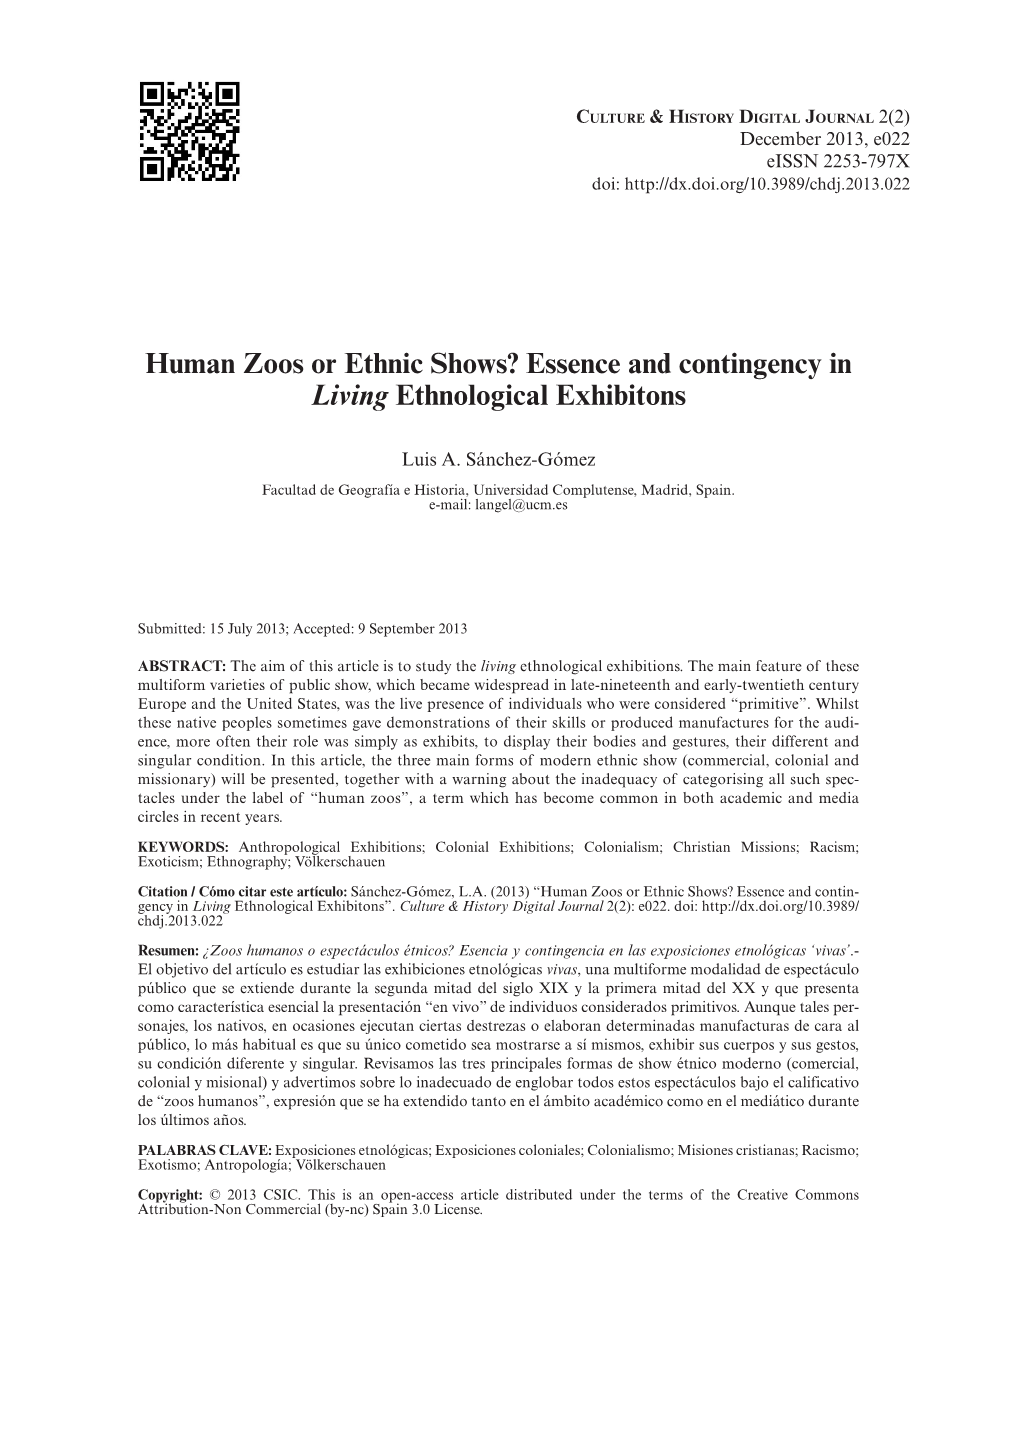 Human Zoos Or Ethnic Shows? Essence and Contingency in Living Ethnological Exhibitons